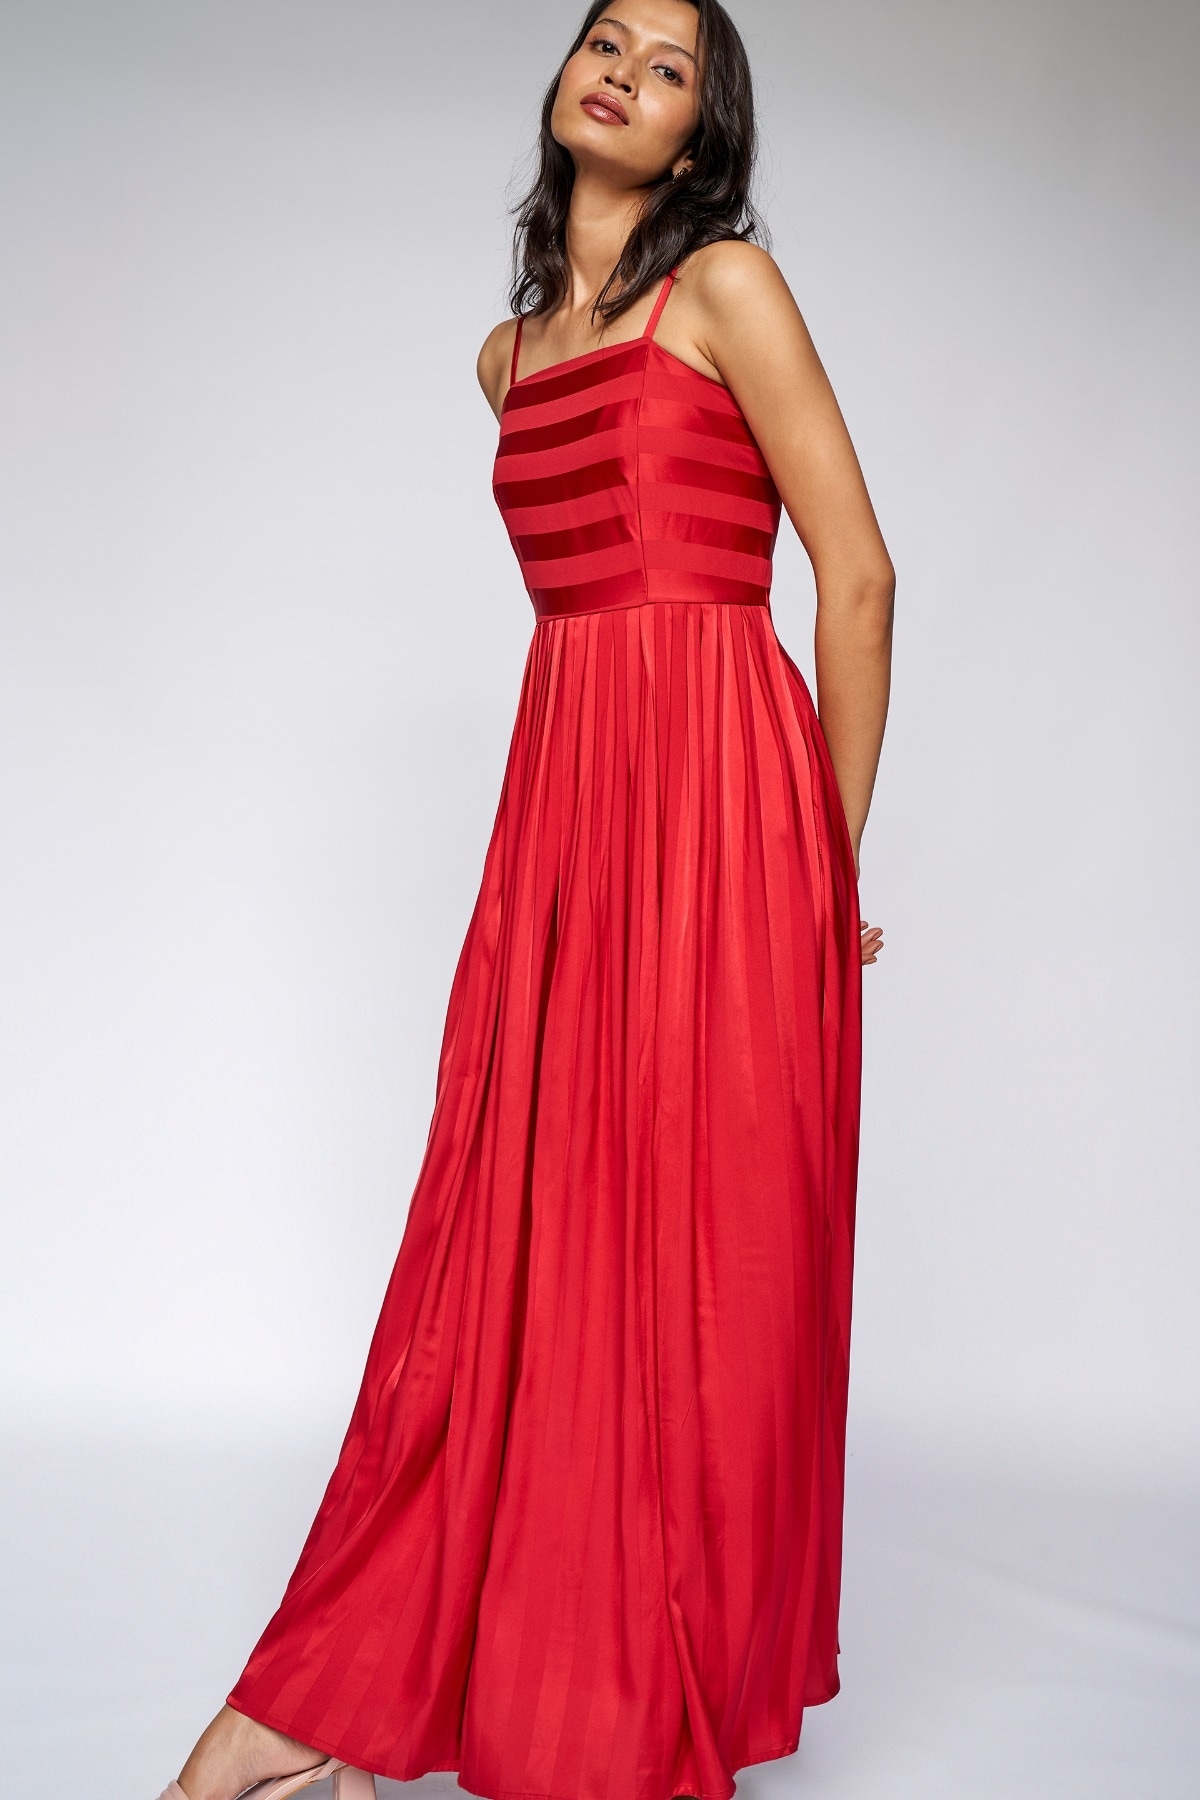 AND RED GOWN